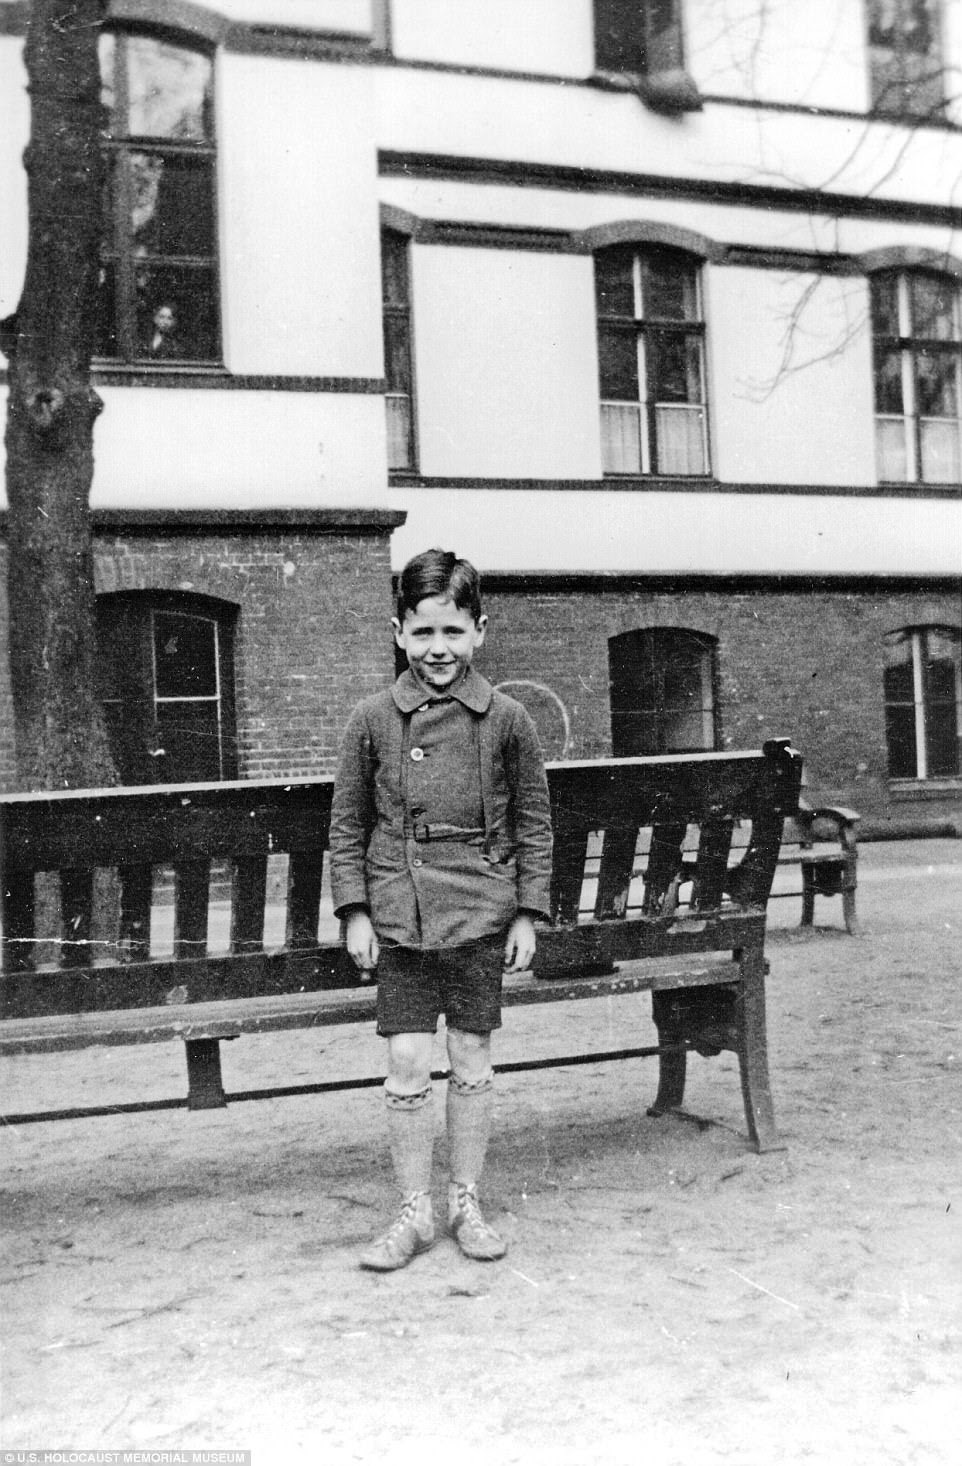 Six-year old Stephan Lewy lived with one hundred other Jewish children at the Barush Auerbach Jewish orphanage in Berlin. His mother had died and his father could not care for him but came often until he was sent to Oranienburg concentration camp